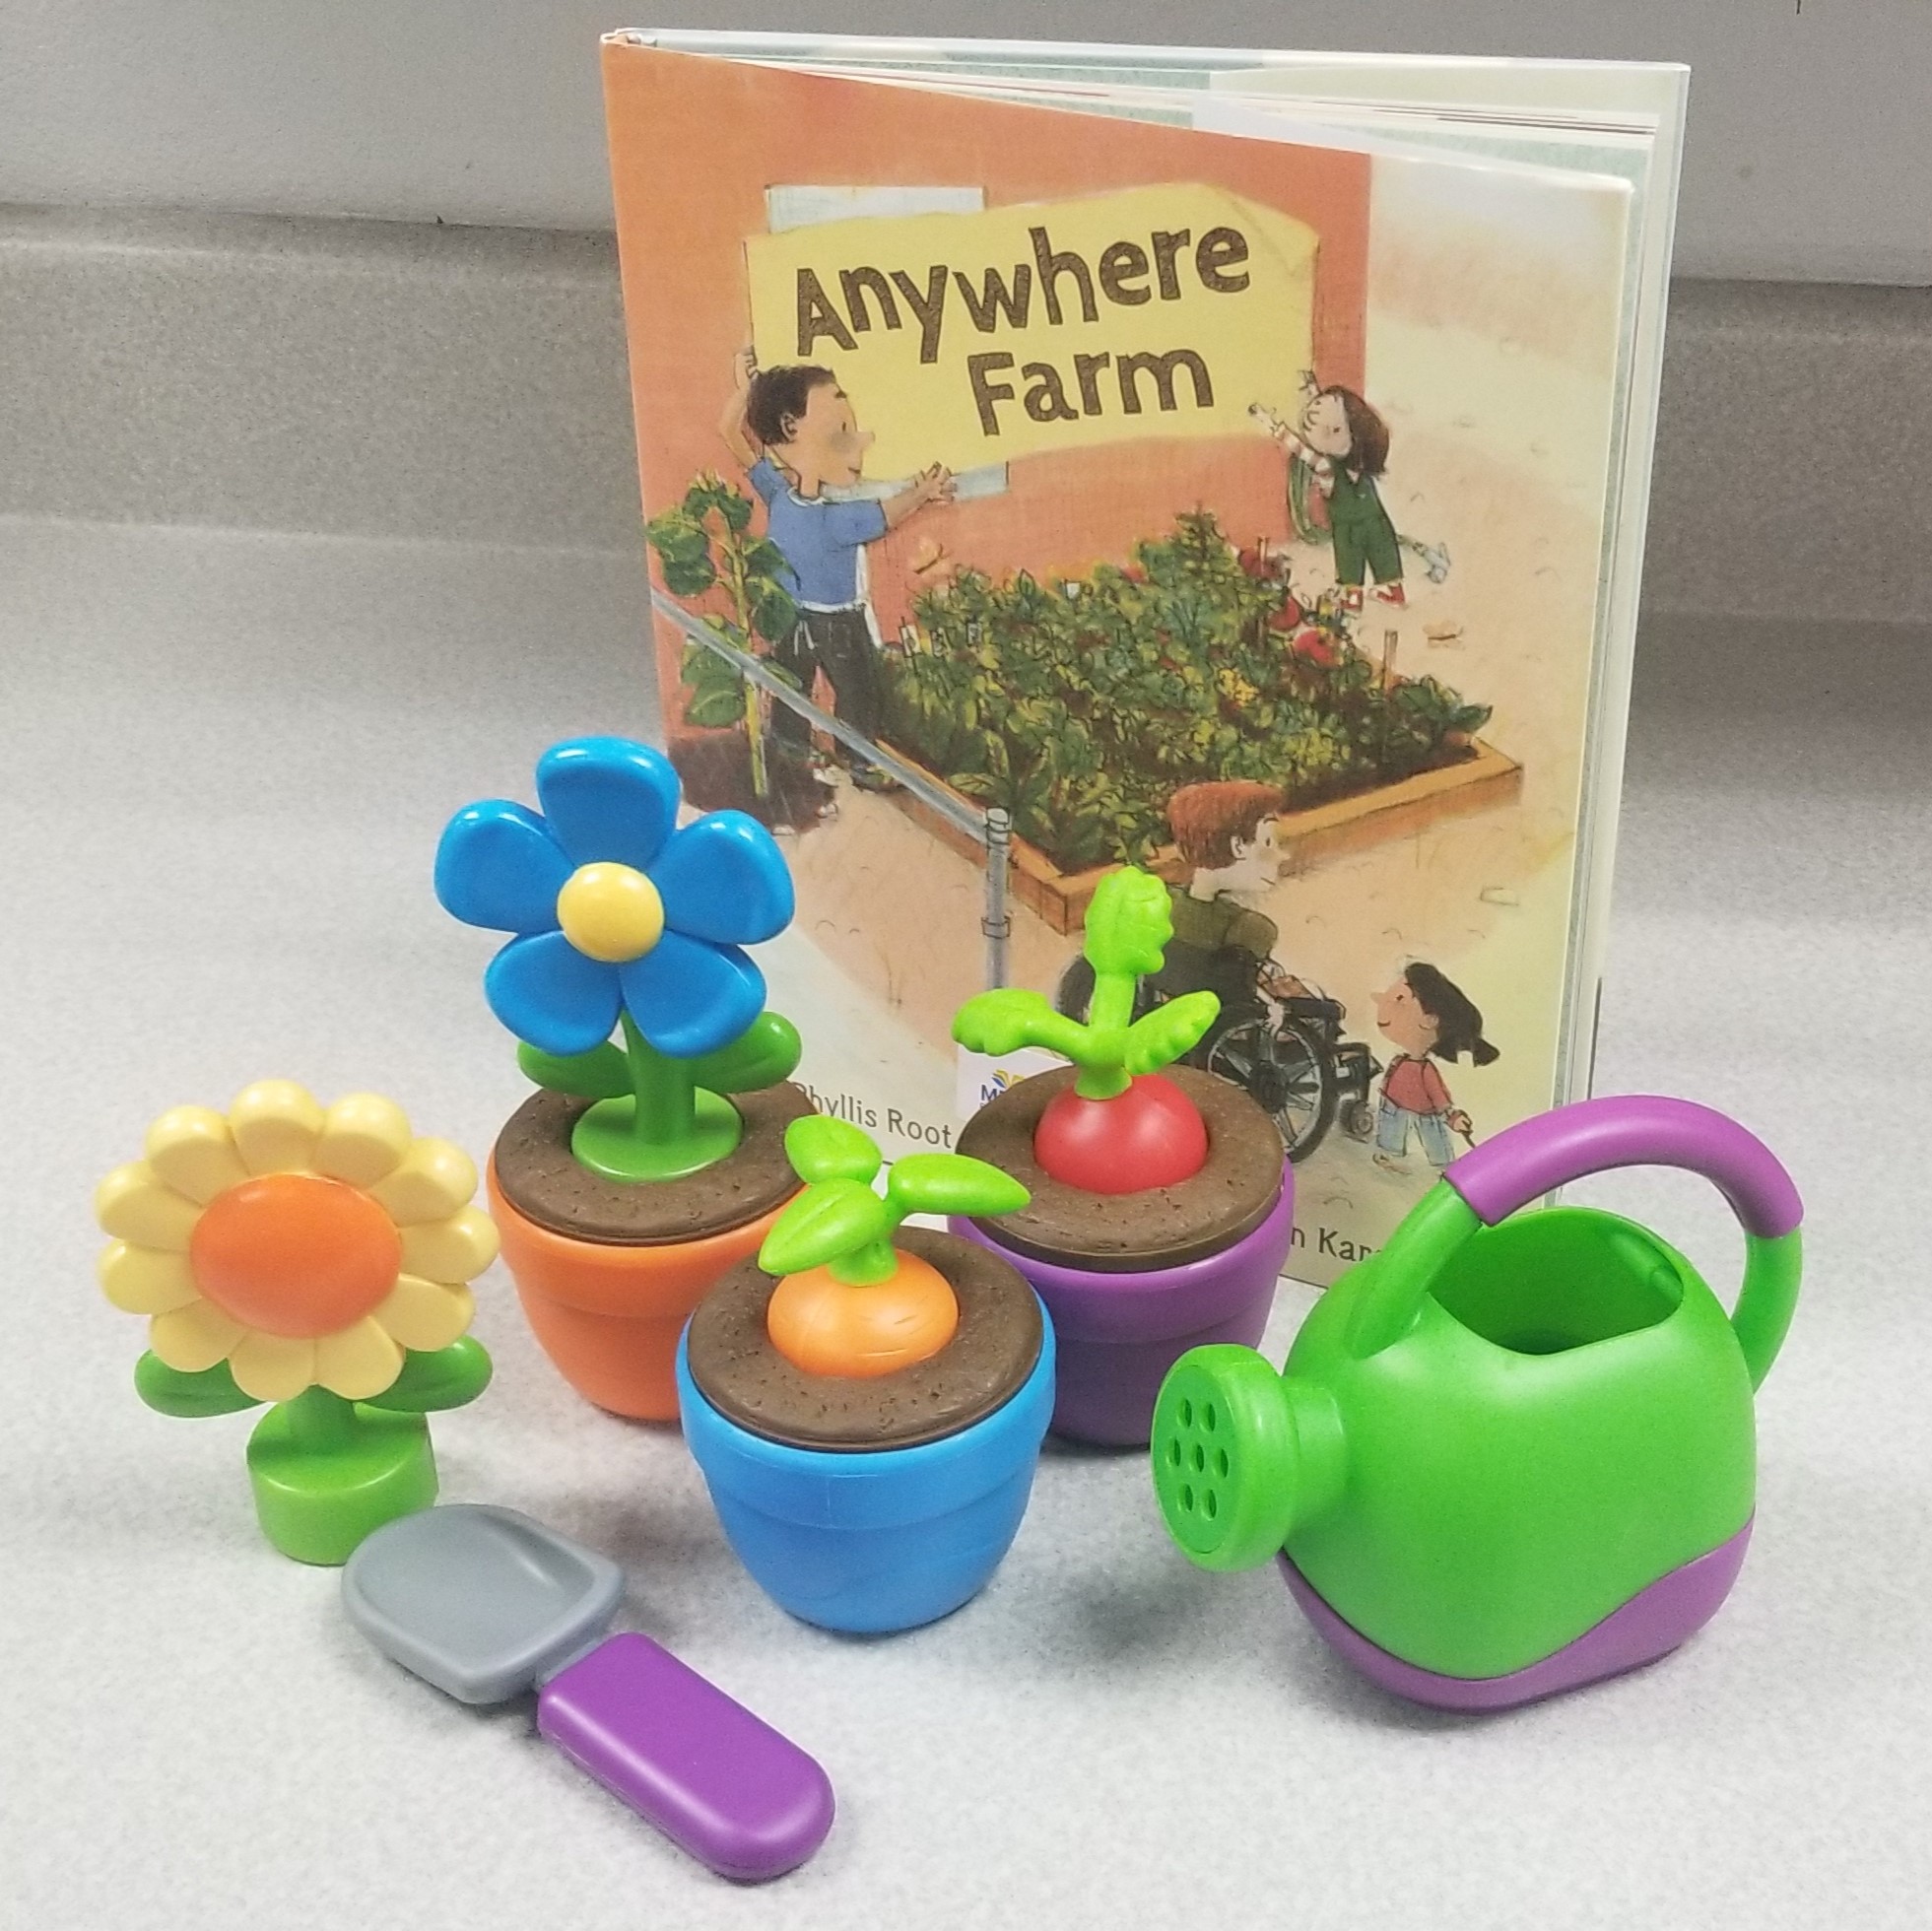 Image of playset including a watering can, plants, and trowel and a book titled "Anywhere Farm"